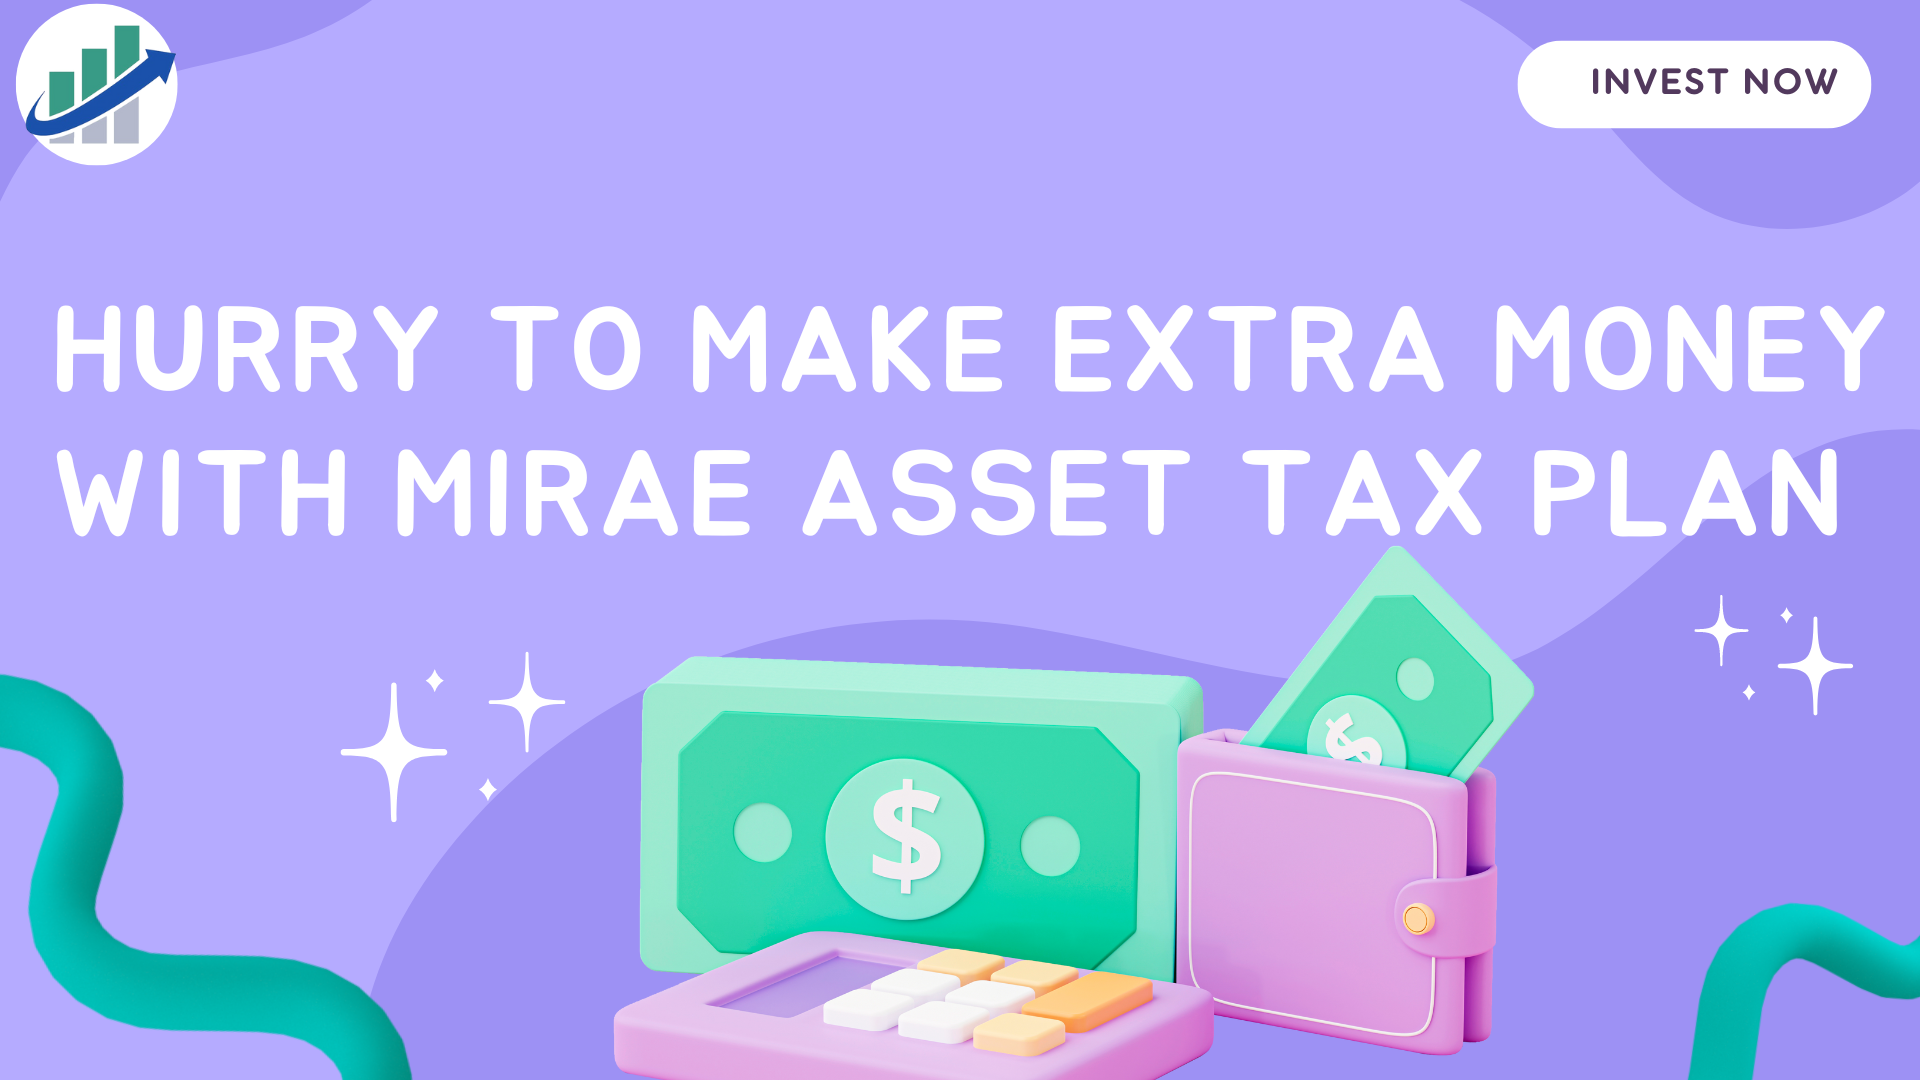 Hurry to Make Extra Money with Mirae Asset Tax Plan